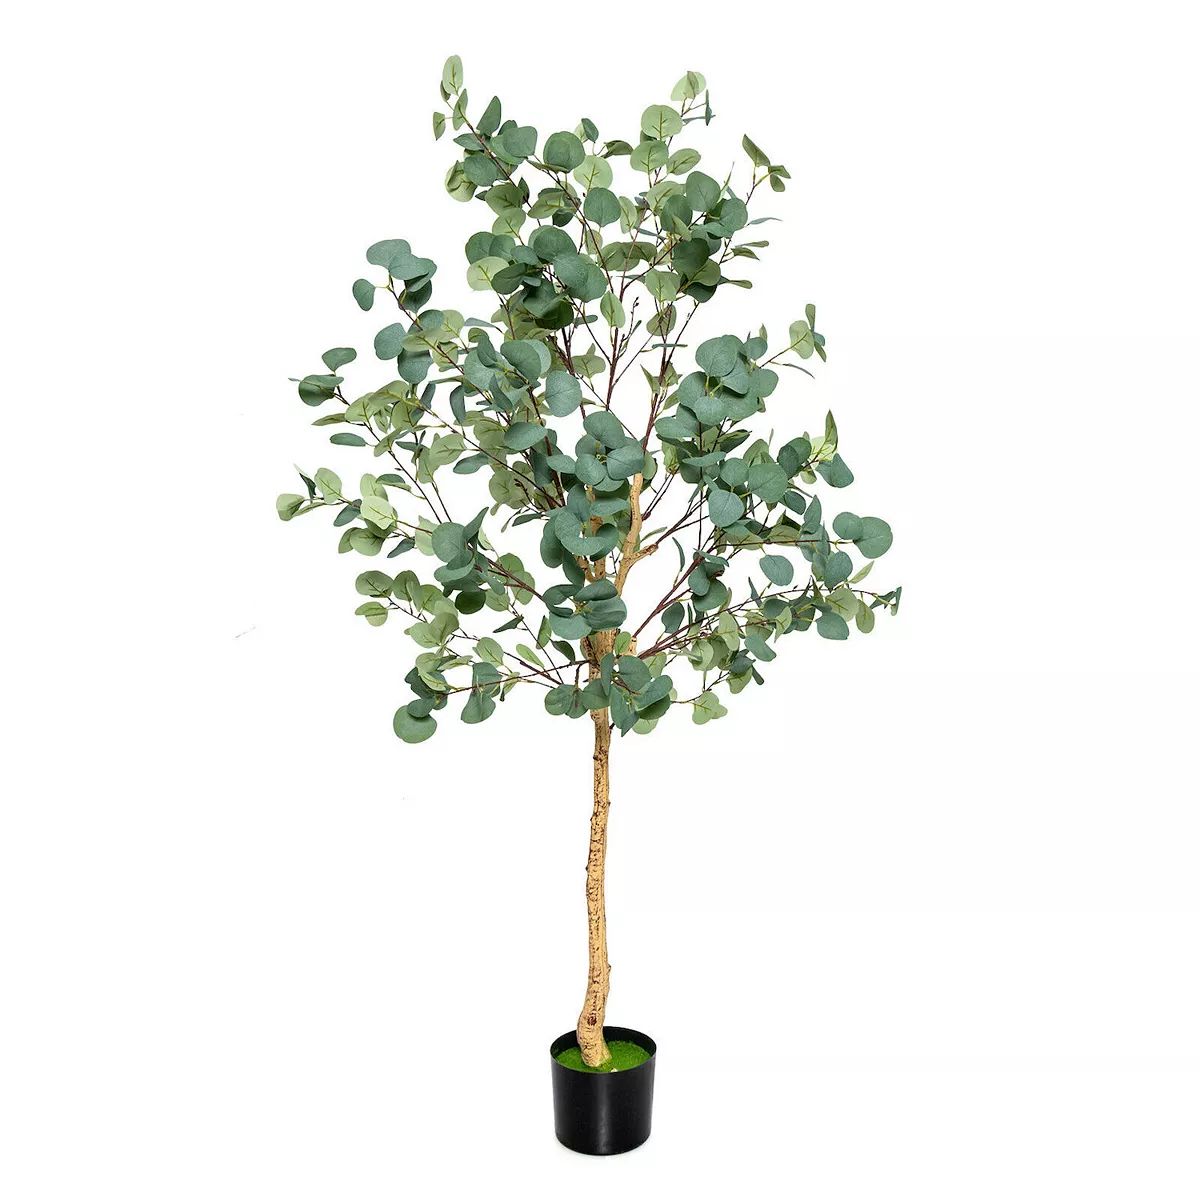 5.5 Feet Artificial Eucalyptus Tree with 517 Silver Dollar Leaves | Kohl's